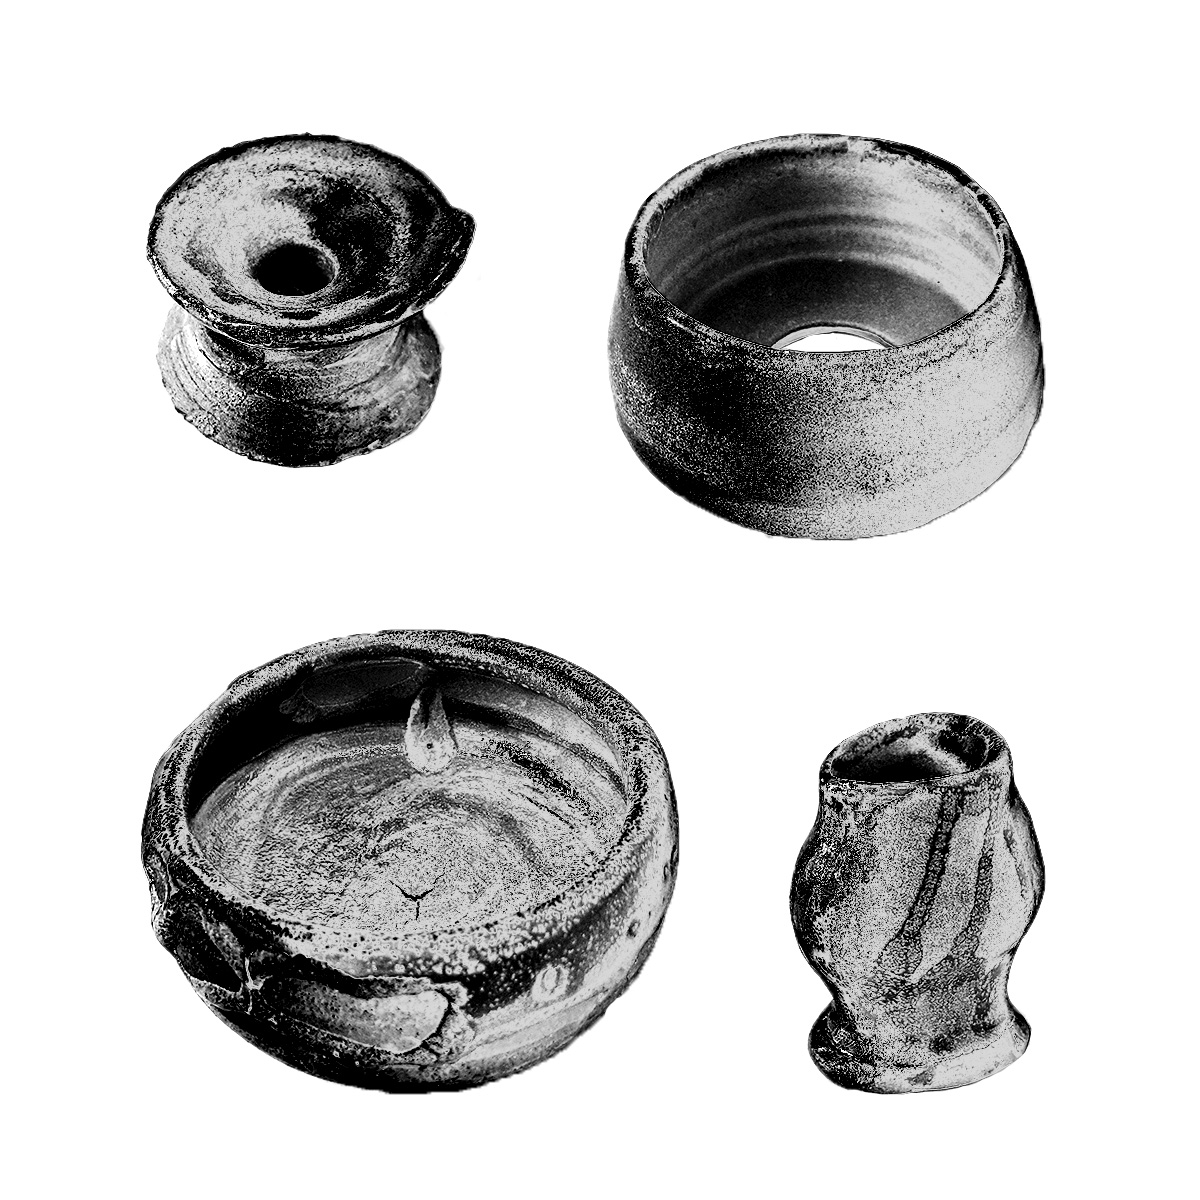 A greyscale picture of four ceramic vessels.